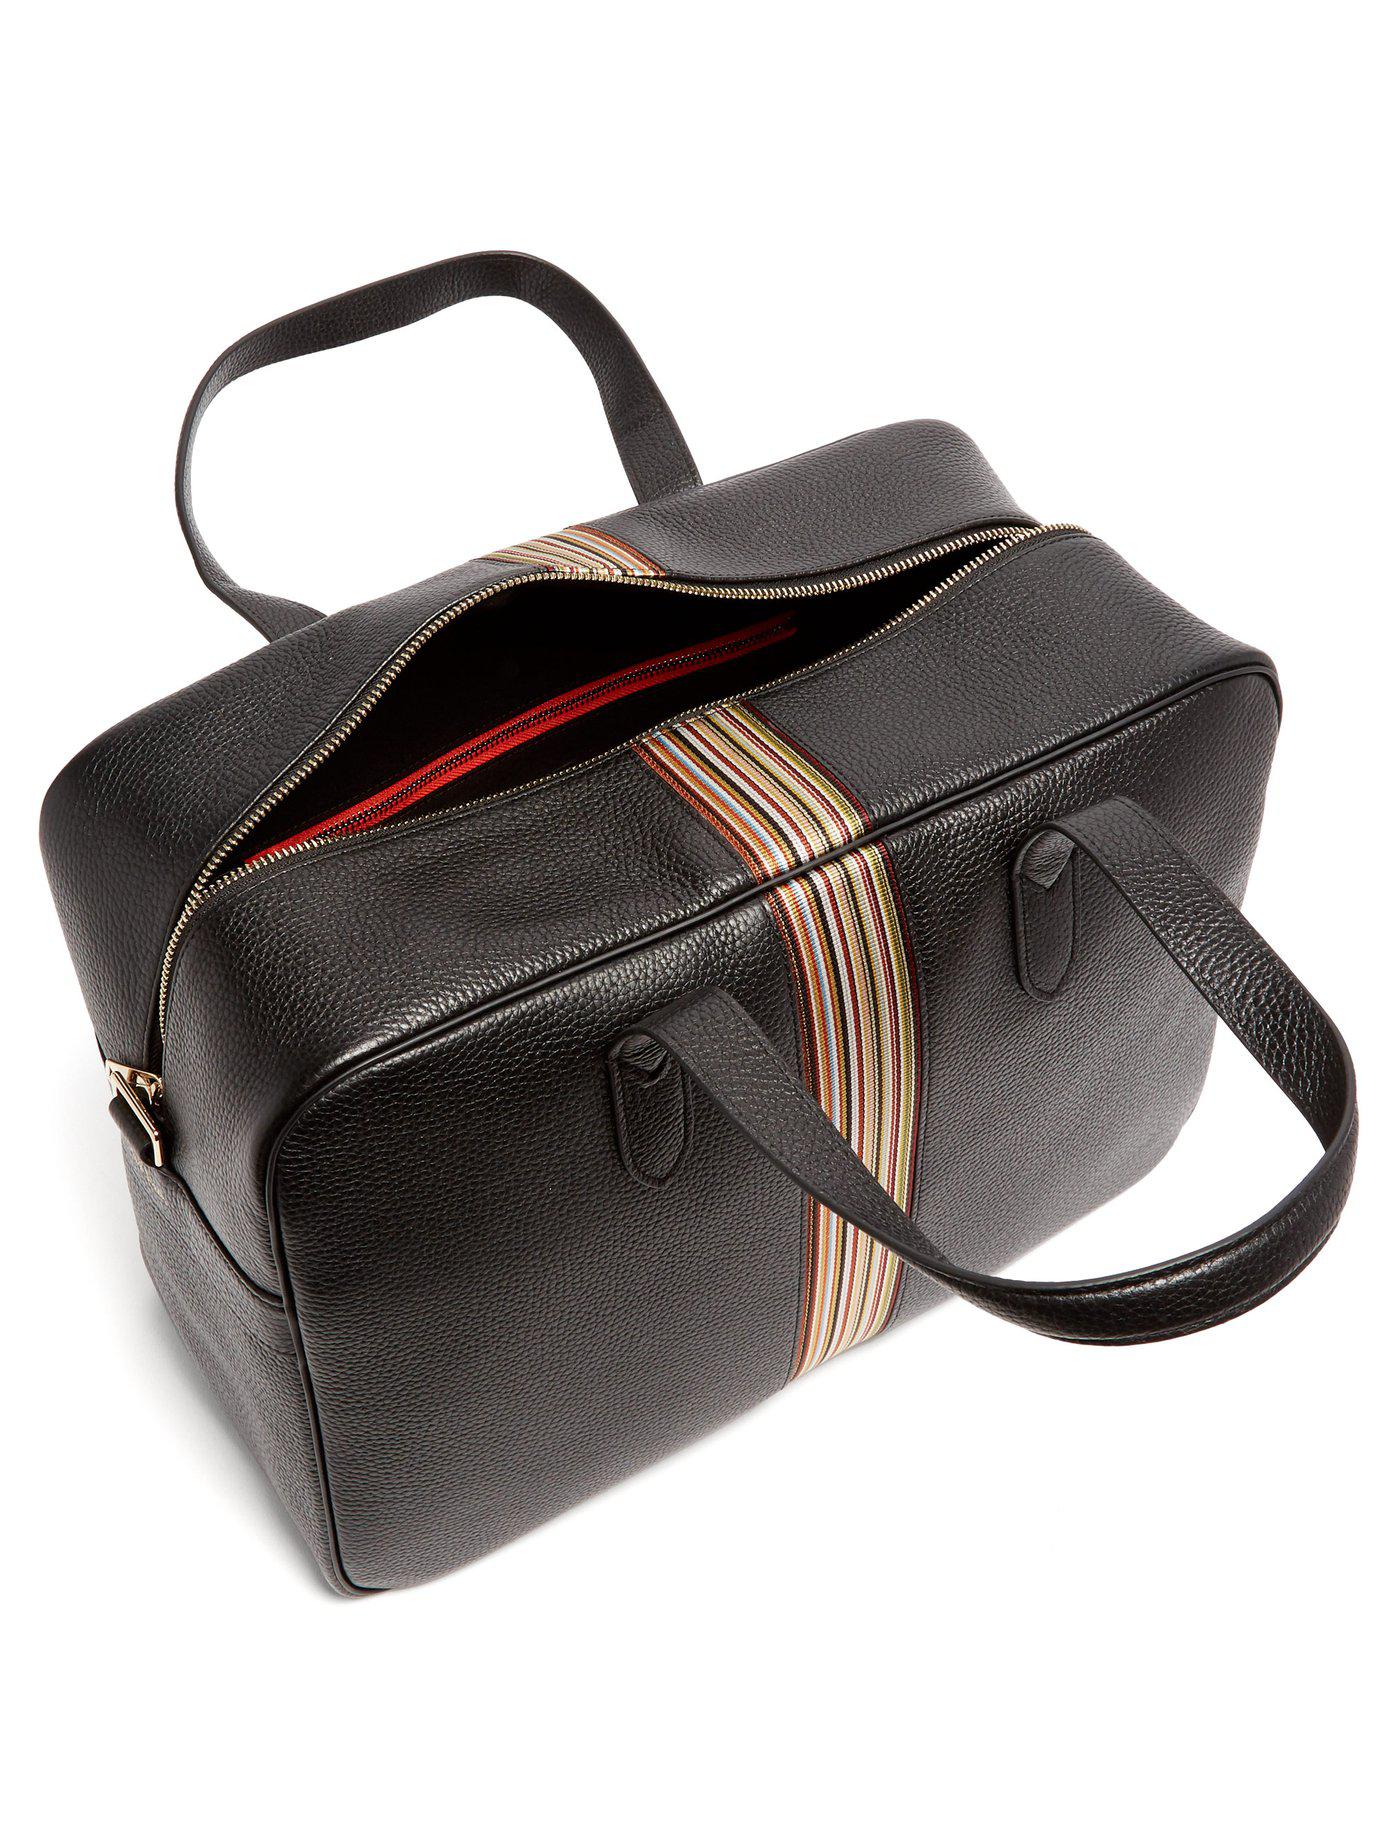 Paul Smith Signature Stripe Pebbled Leather Weekend Bag in Black for Men - Lyst